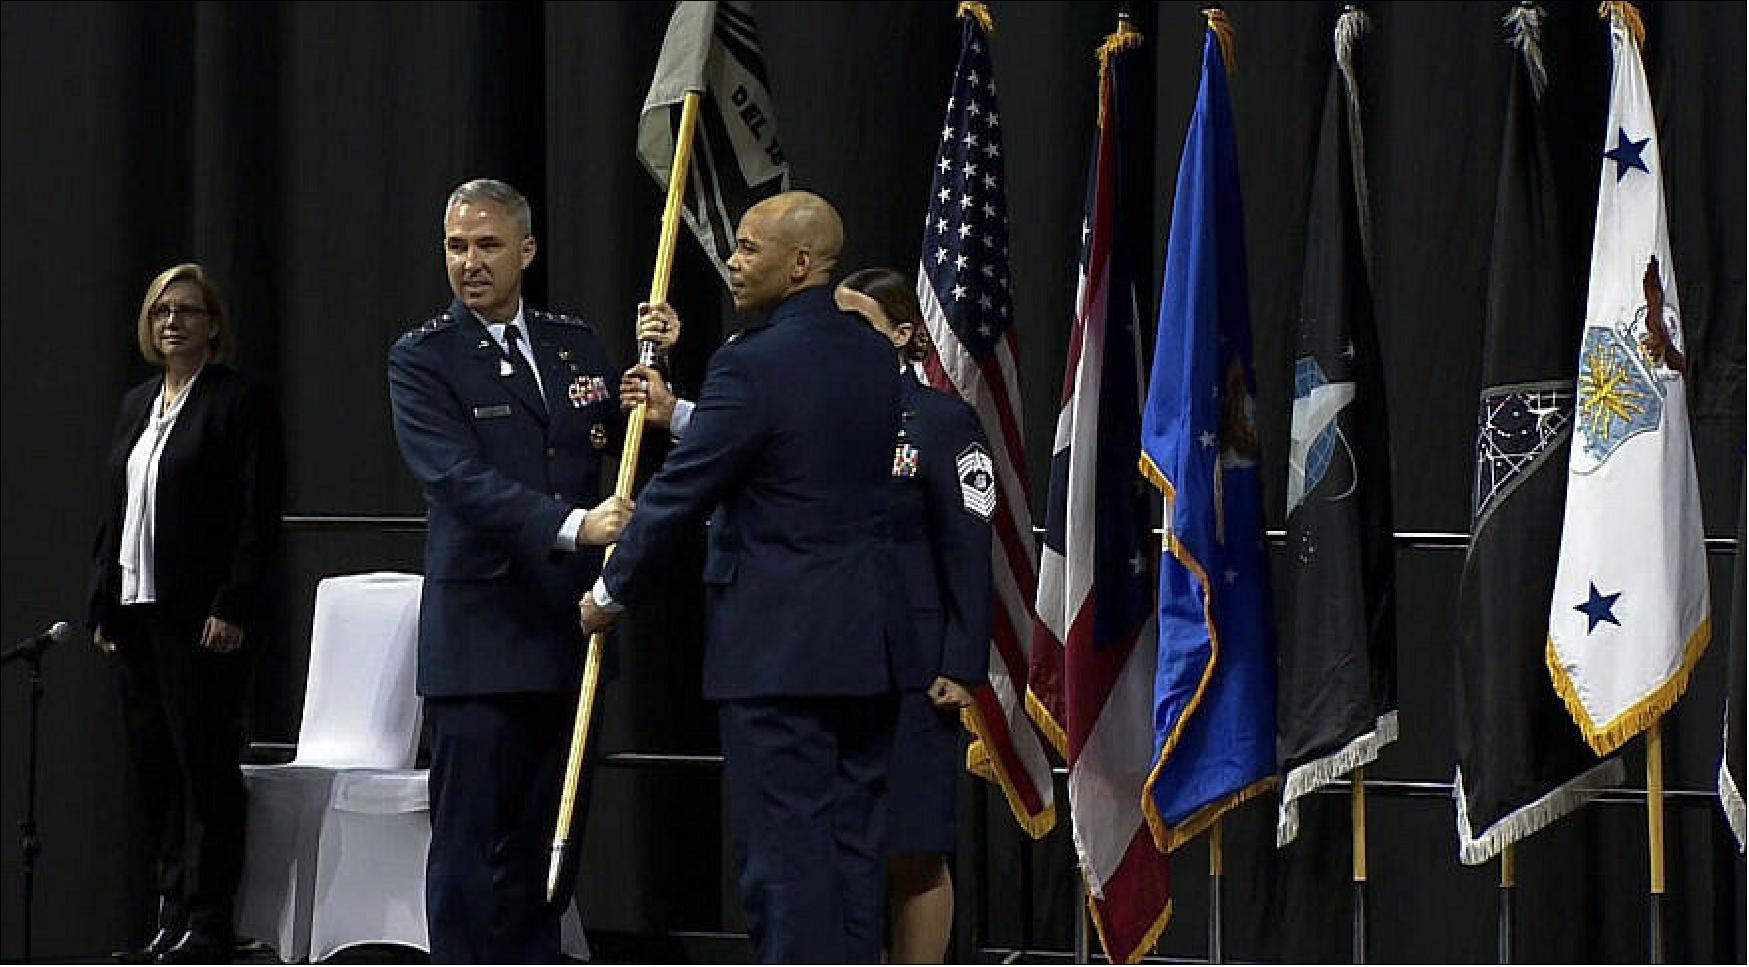 Figure 5: Lt. Gen. Stephen Whiting, commander of Space Operations Command (left) and Col. Marqus Randall, commander of Space Delta 18, establish the National Space Intelligence Center June 24, 2022, at a ceremony in Dayton, Ohio (image credit: U.S. Space Force)